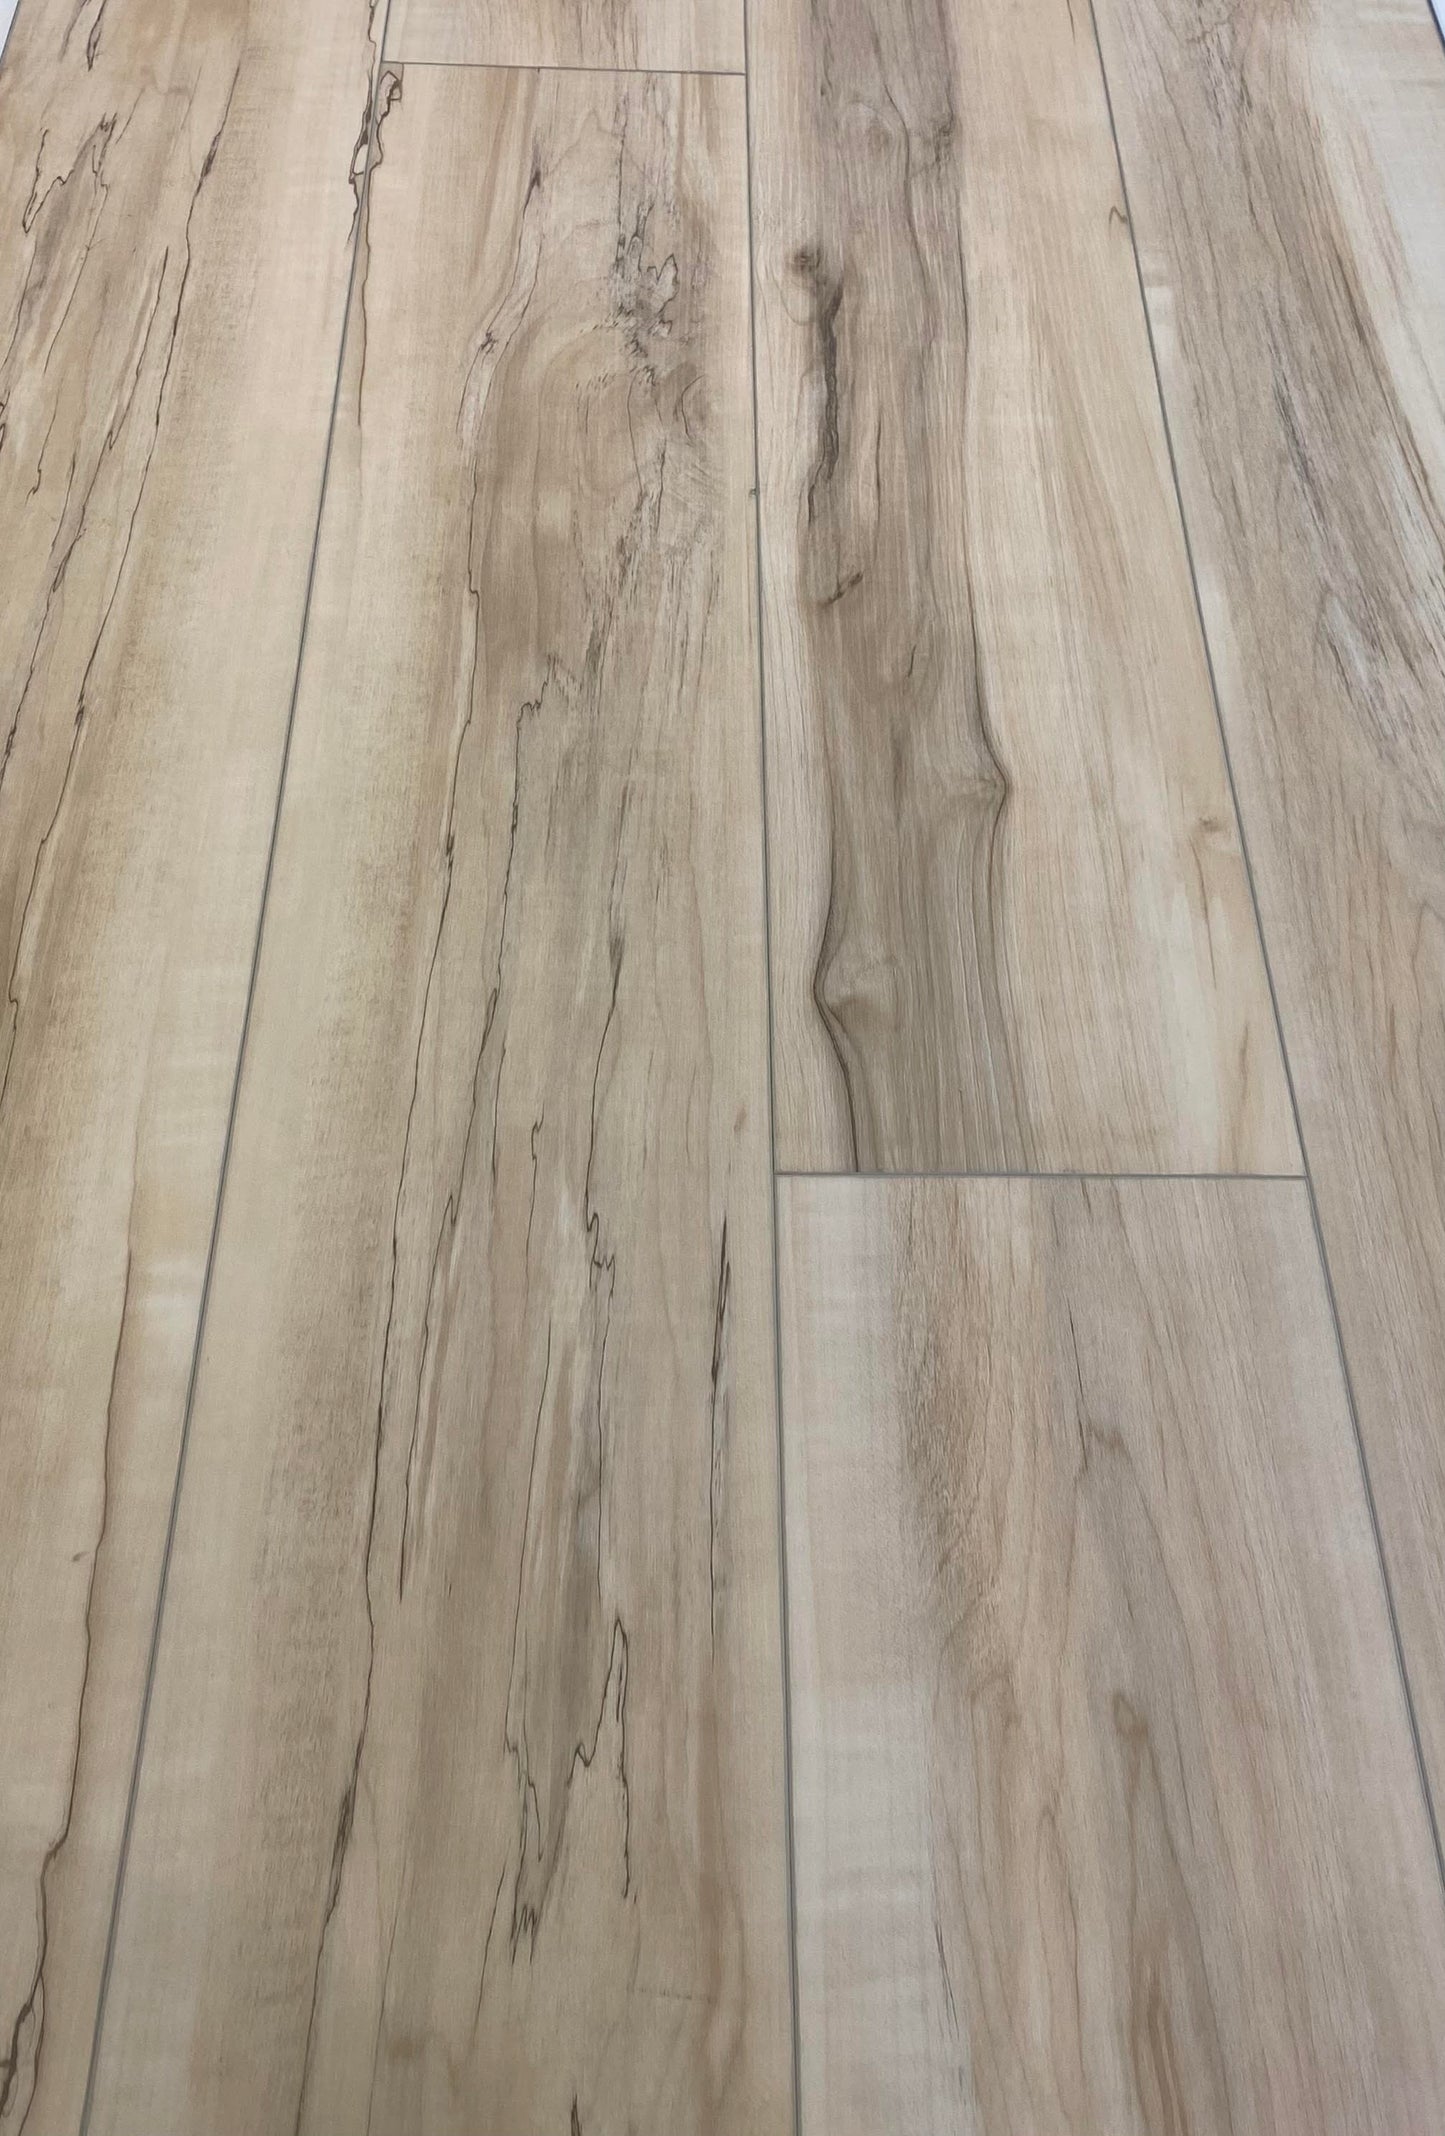 Spalted Maple Vinyl Planks (pad attached) $2.89/sf 23.64 sf/box